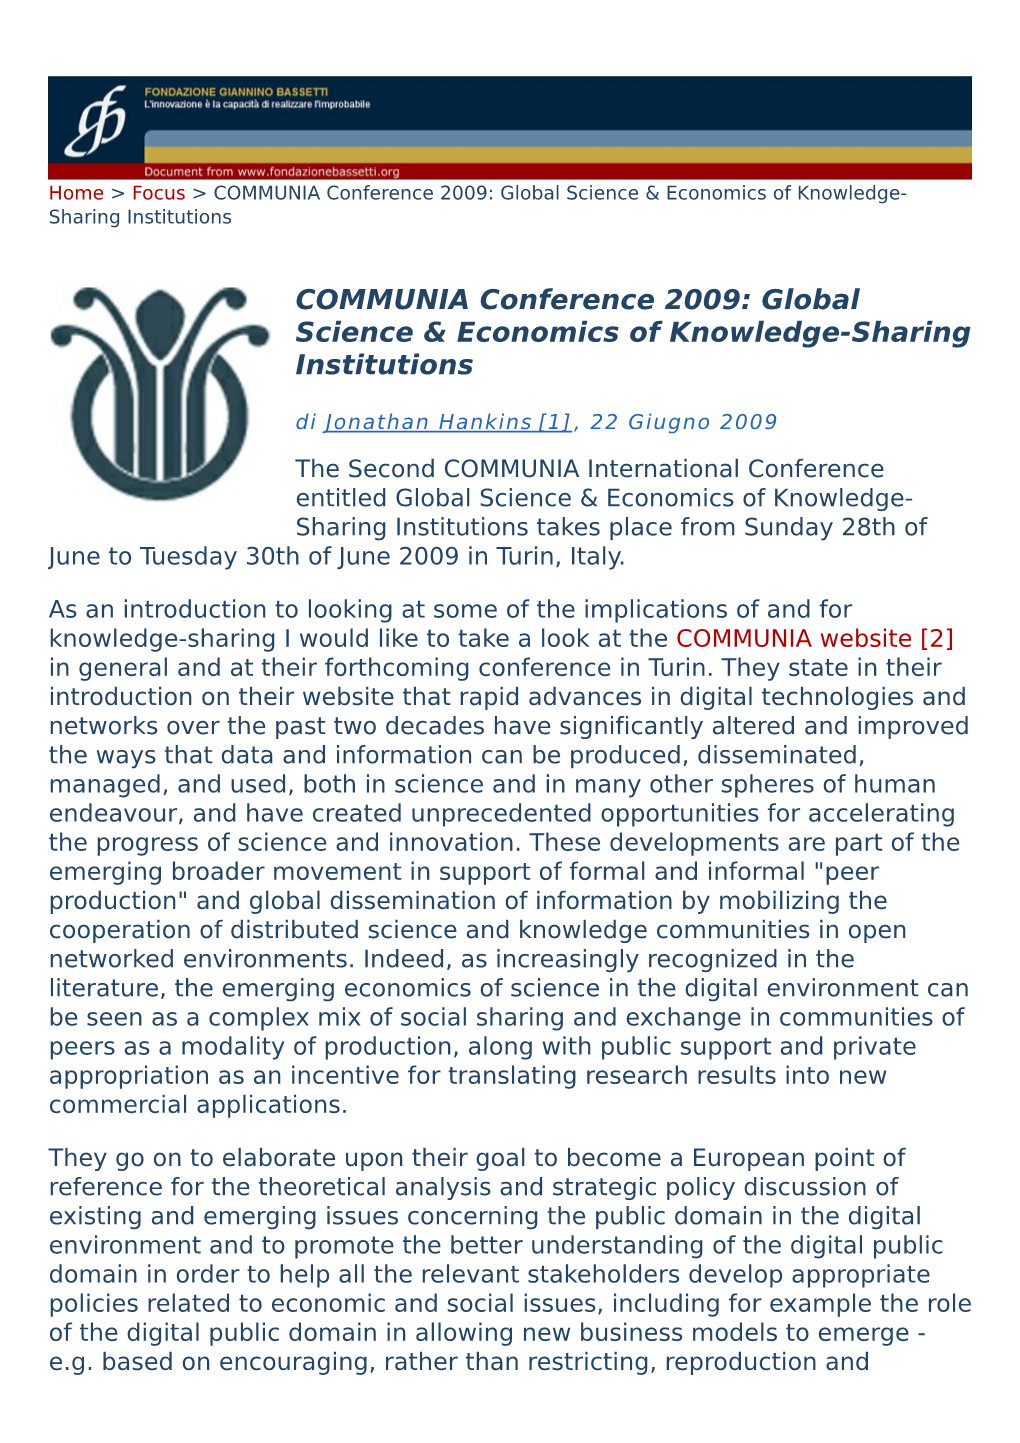 COMMUNIA Conference 2009: Global Science & Economics of Knowledge- Sharing Institutions